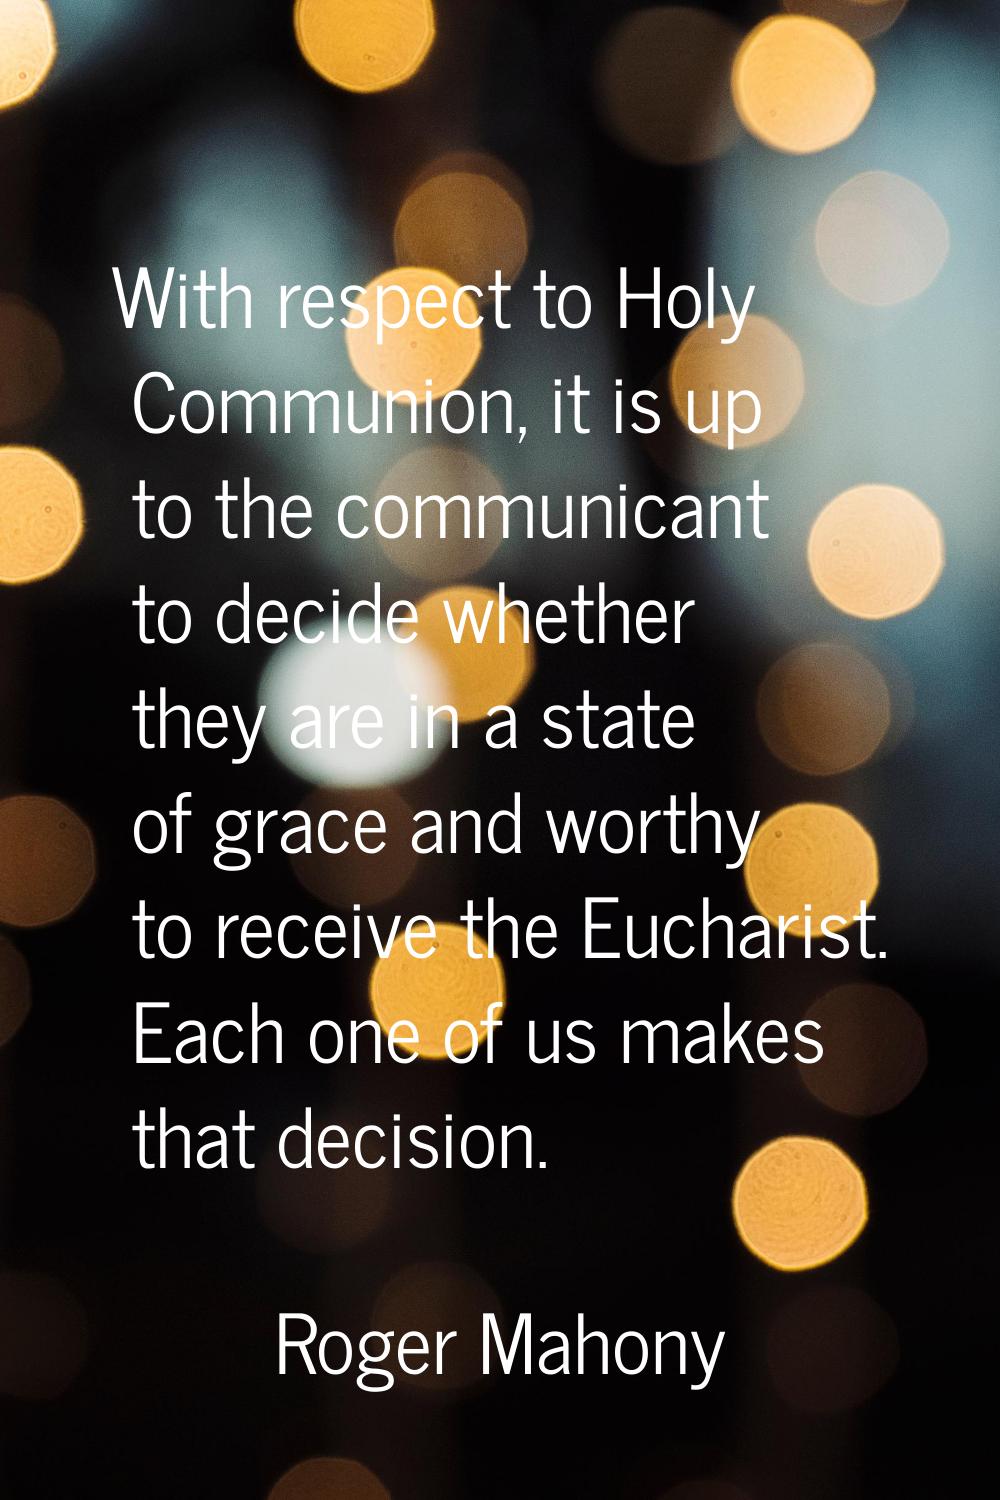 With respect to Holy Communion, it is up to the communicant to decide whether they are in a state o